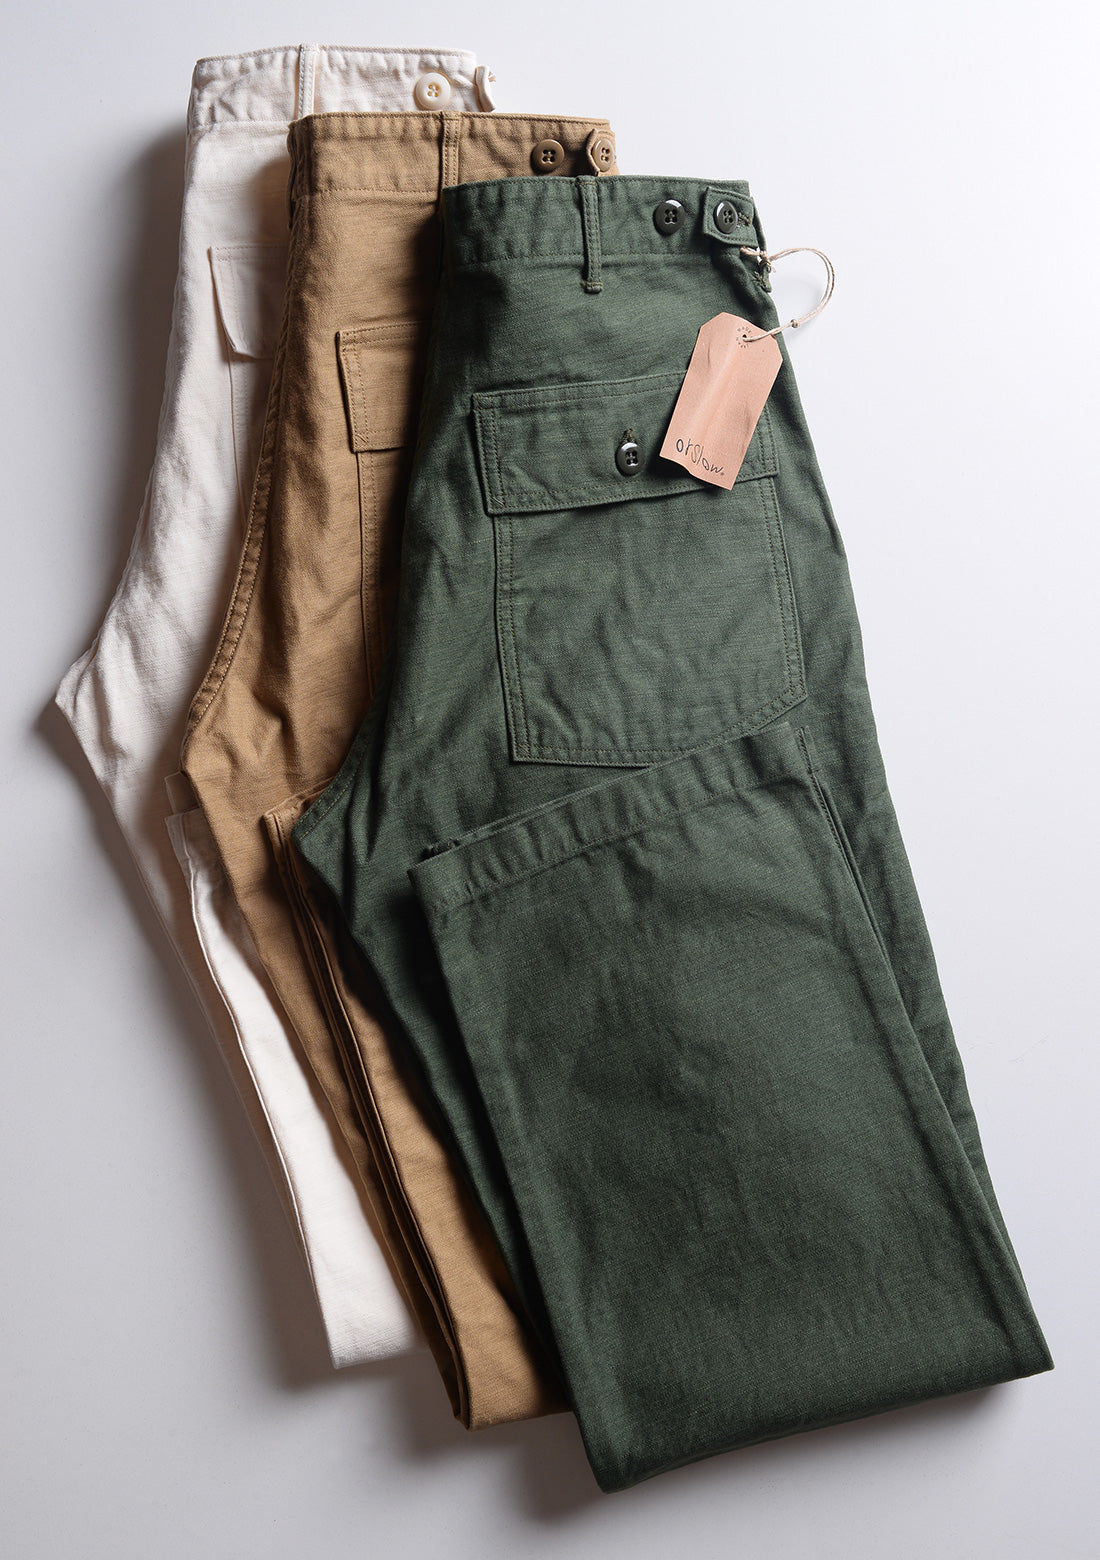 Folded detail of Orslow US Army Fatigue Trousers - Army Green showing back pocket and hem